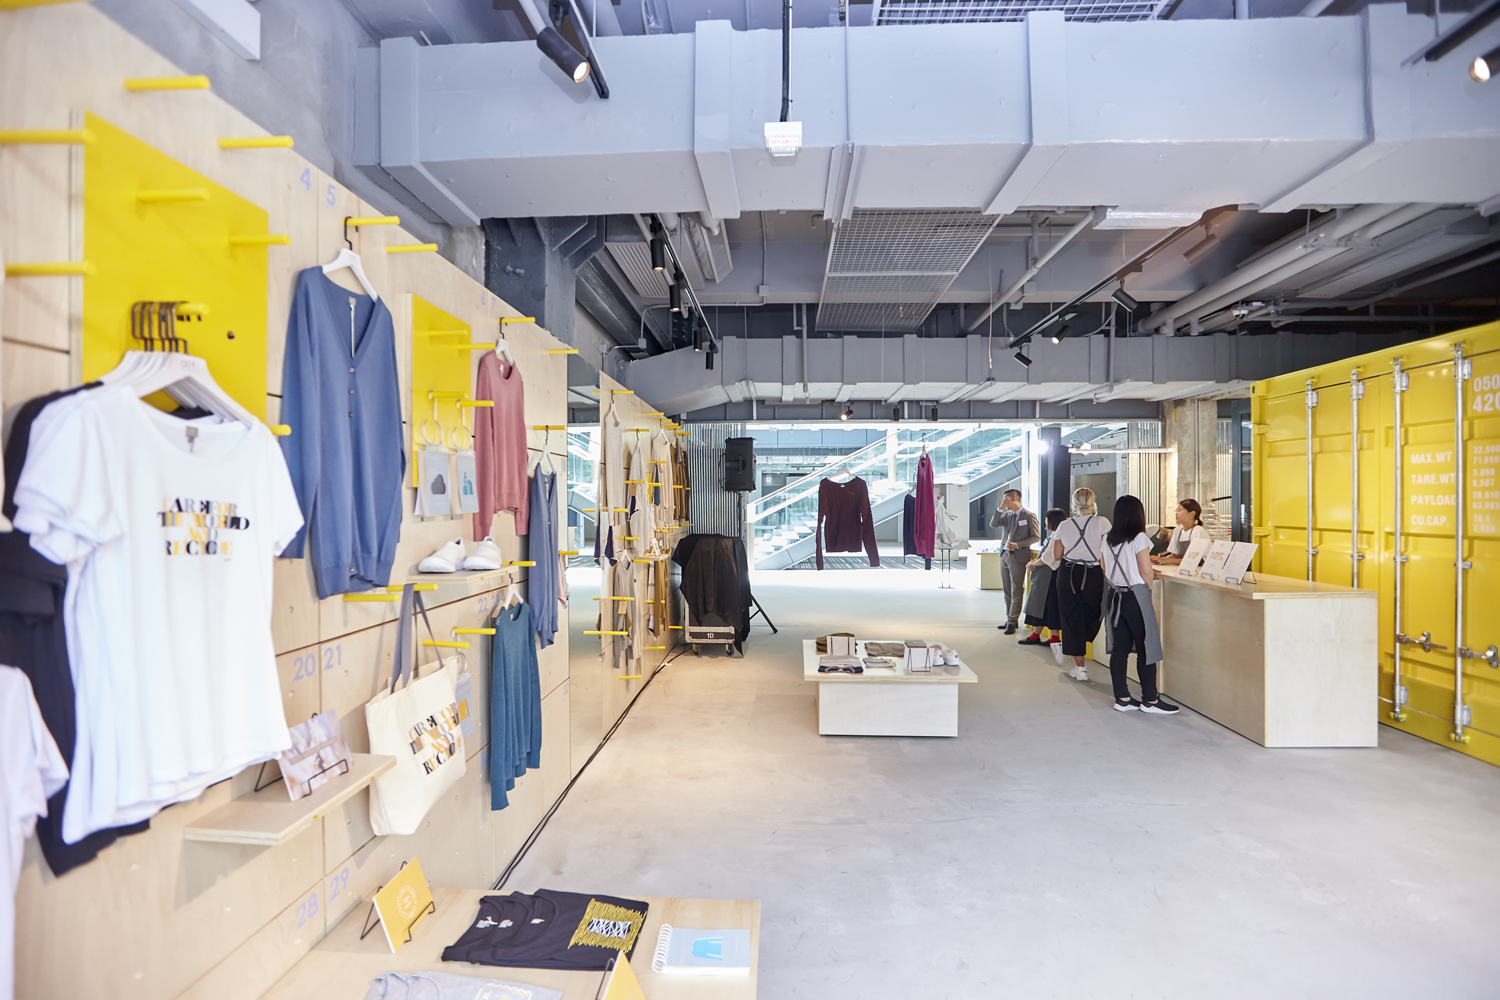 We Explore Converted Textile Space The Mills With W Hong Kong’s New ...